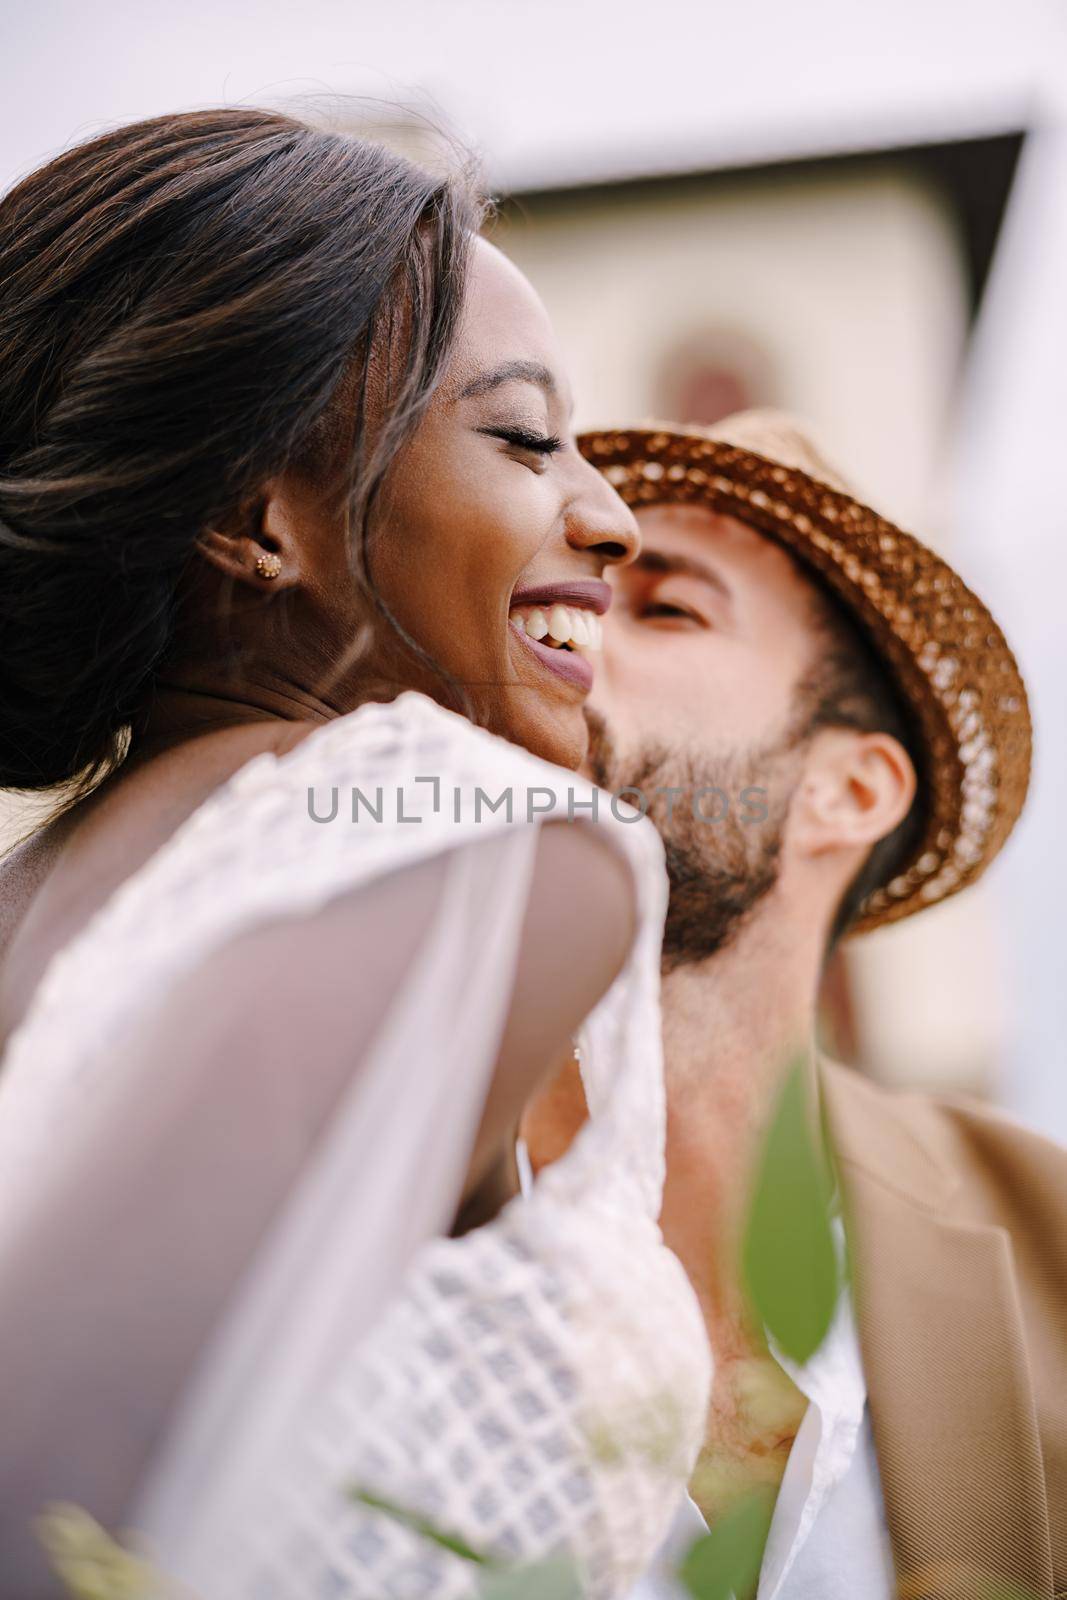 Multiracial wedding couple. Wedding in Florence, Italy. A close-up of portraits of an African-American bride and Caucasian groom in a straw hat. by Nadtochiy